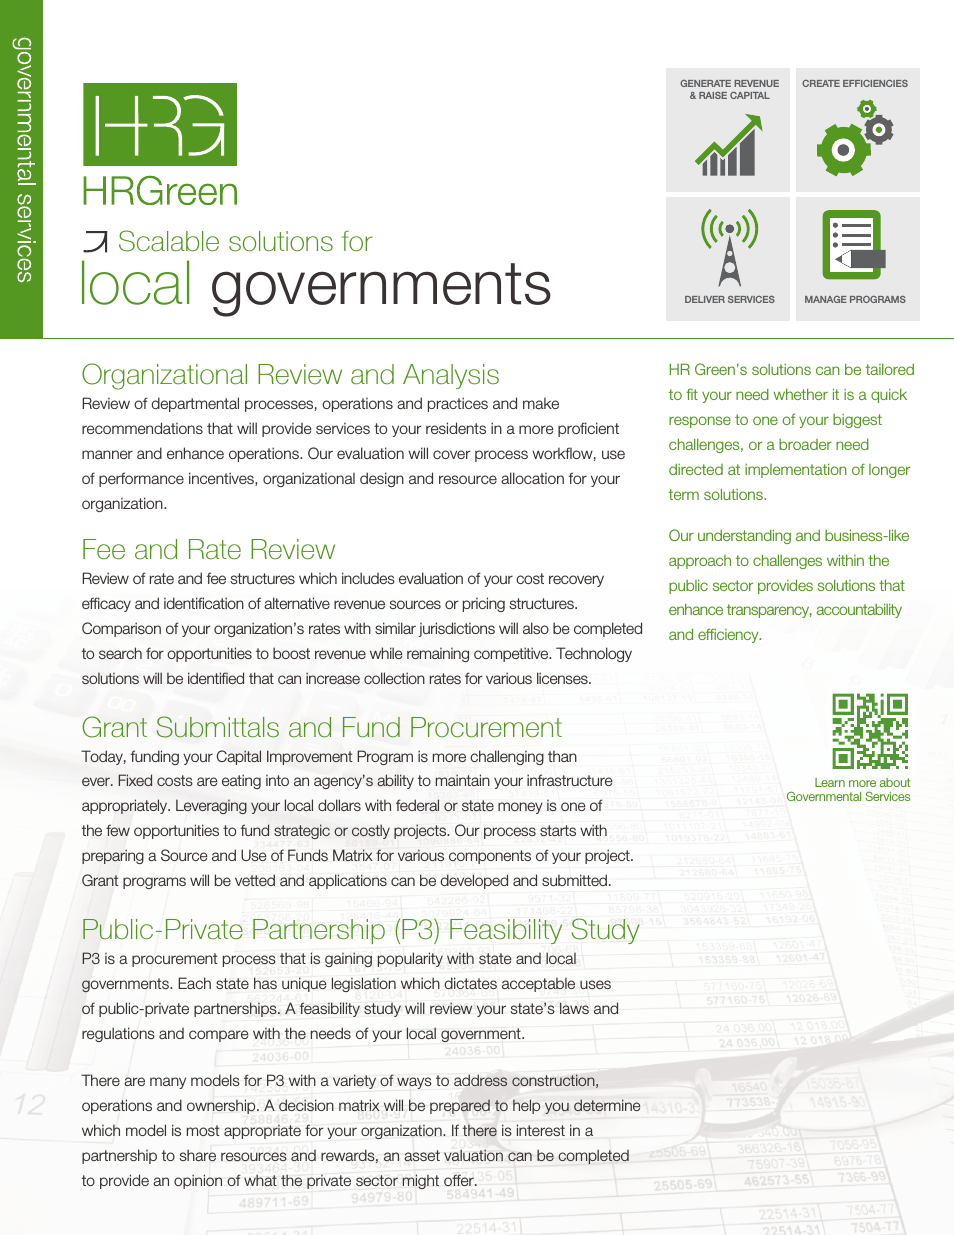 Services for Local Governments